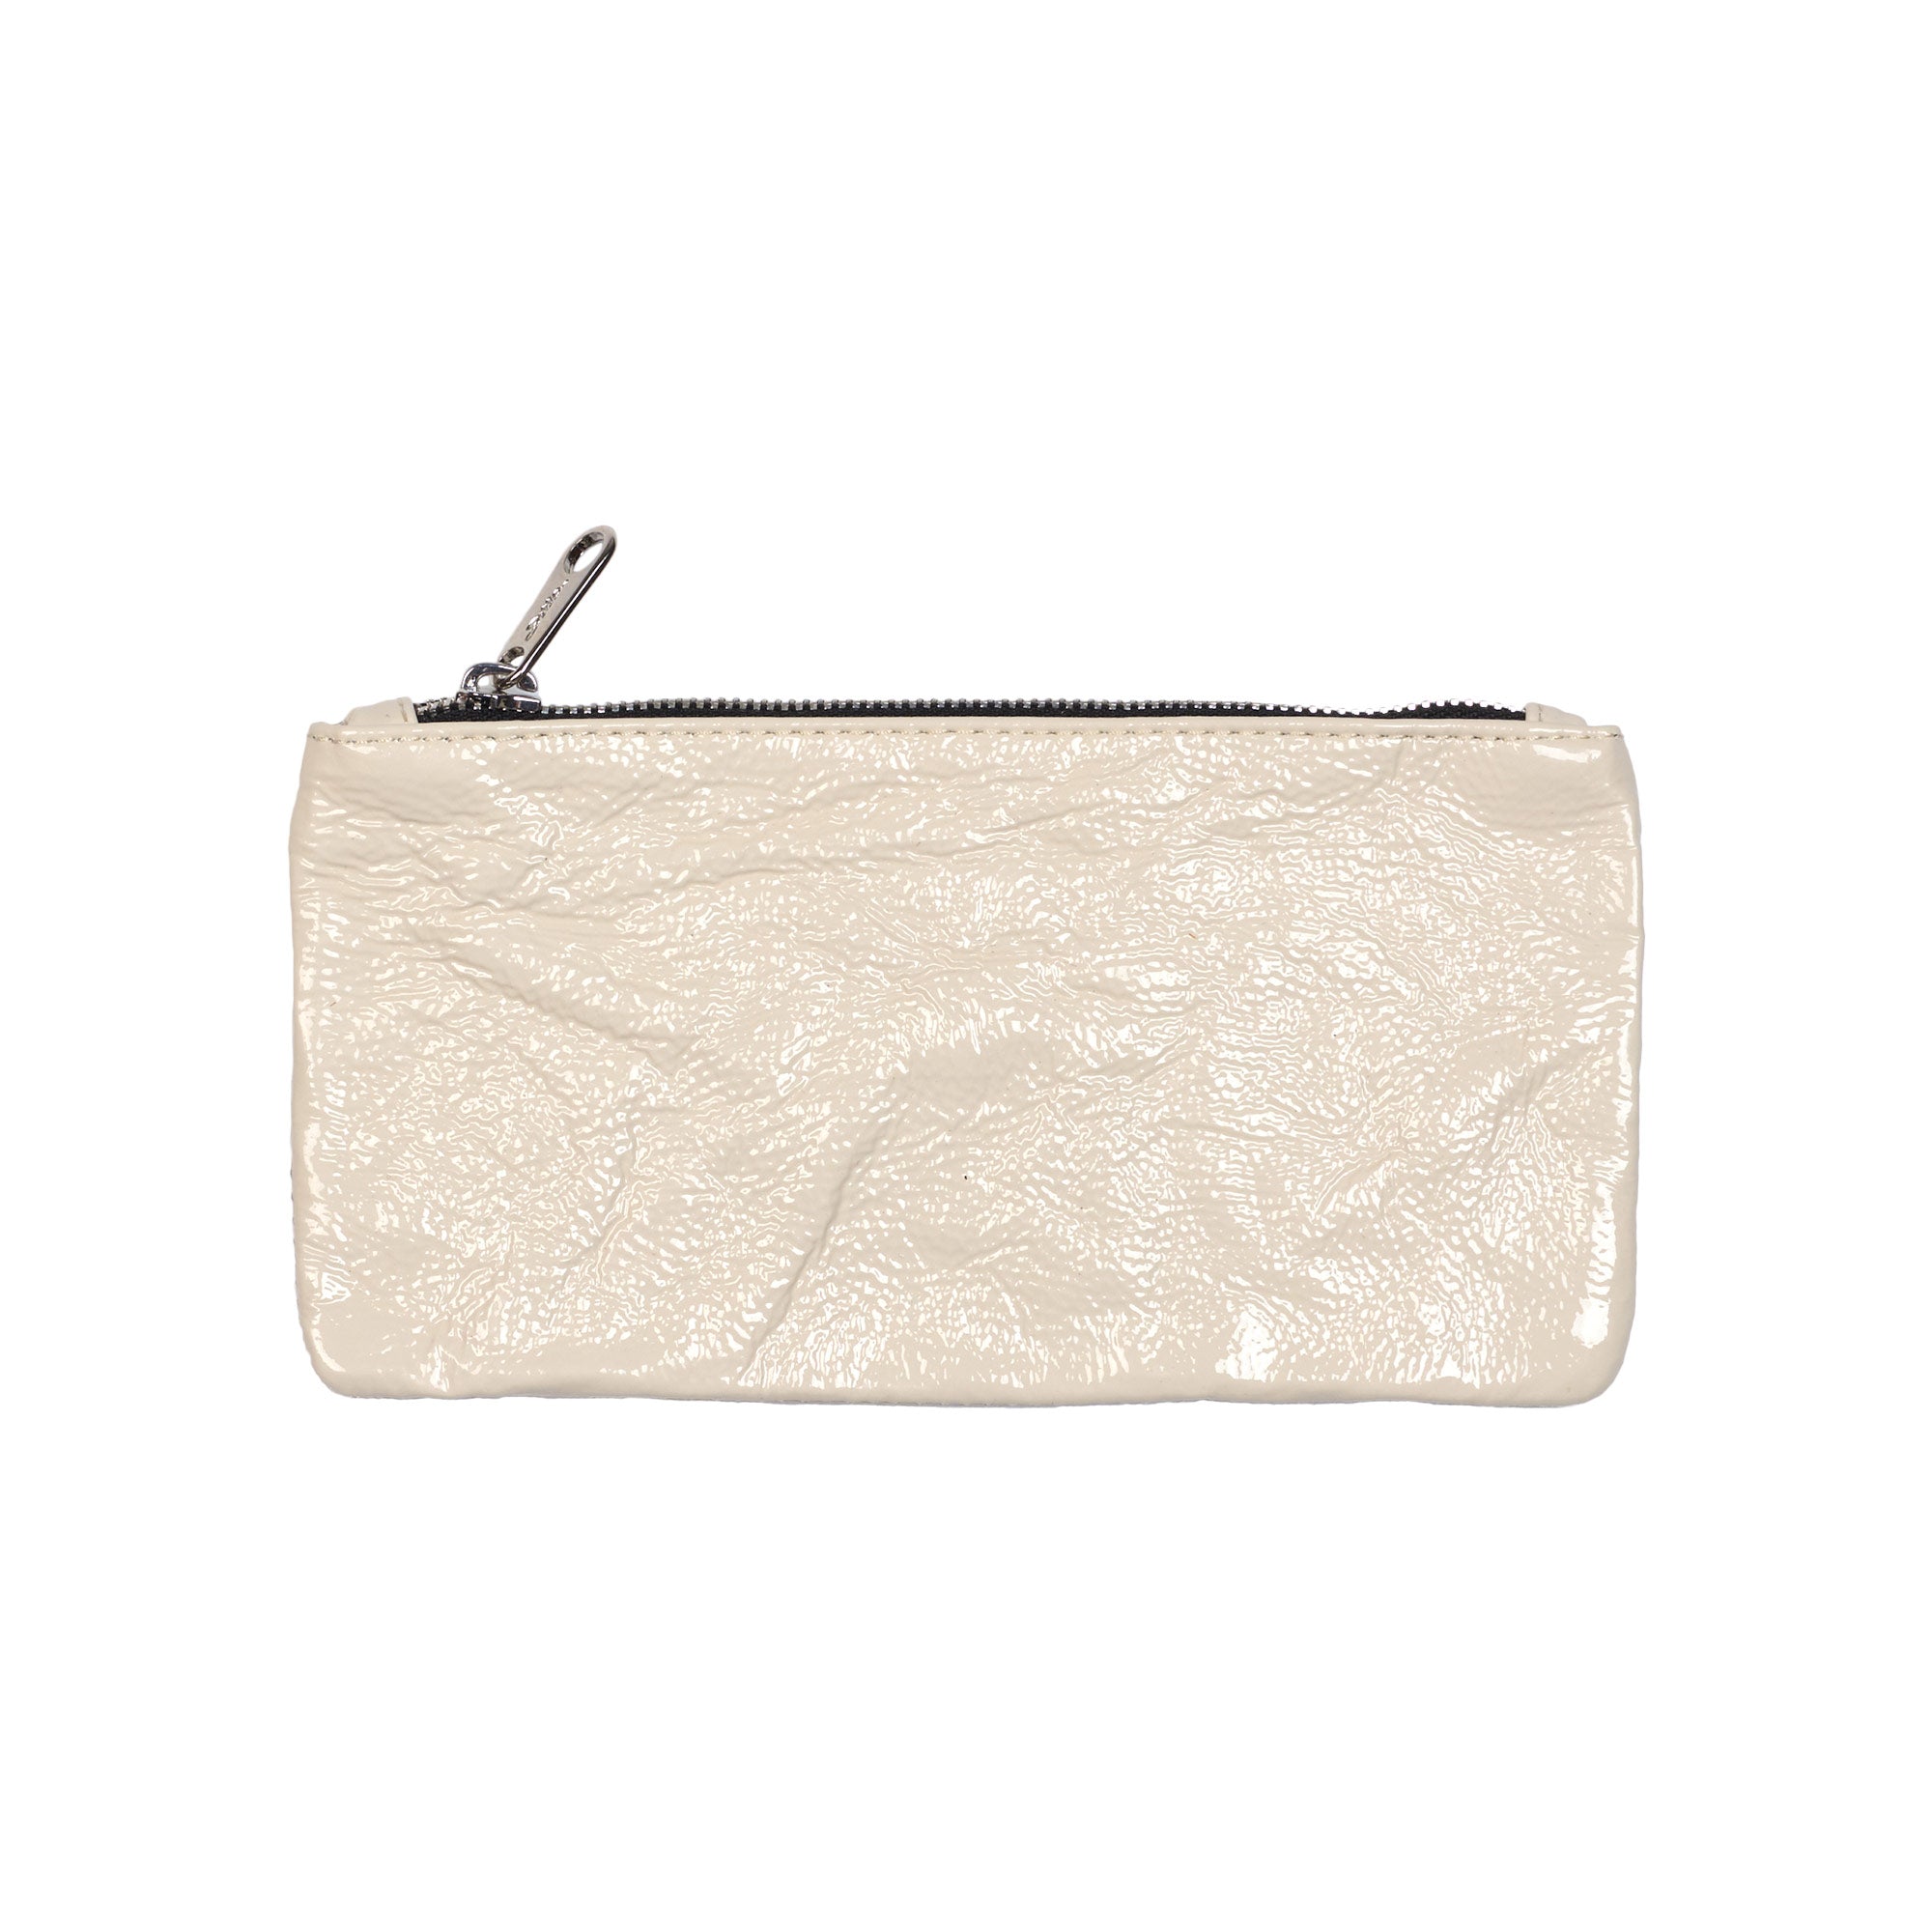 Leather Pouch - Panna, Small